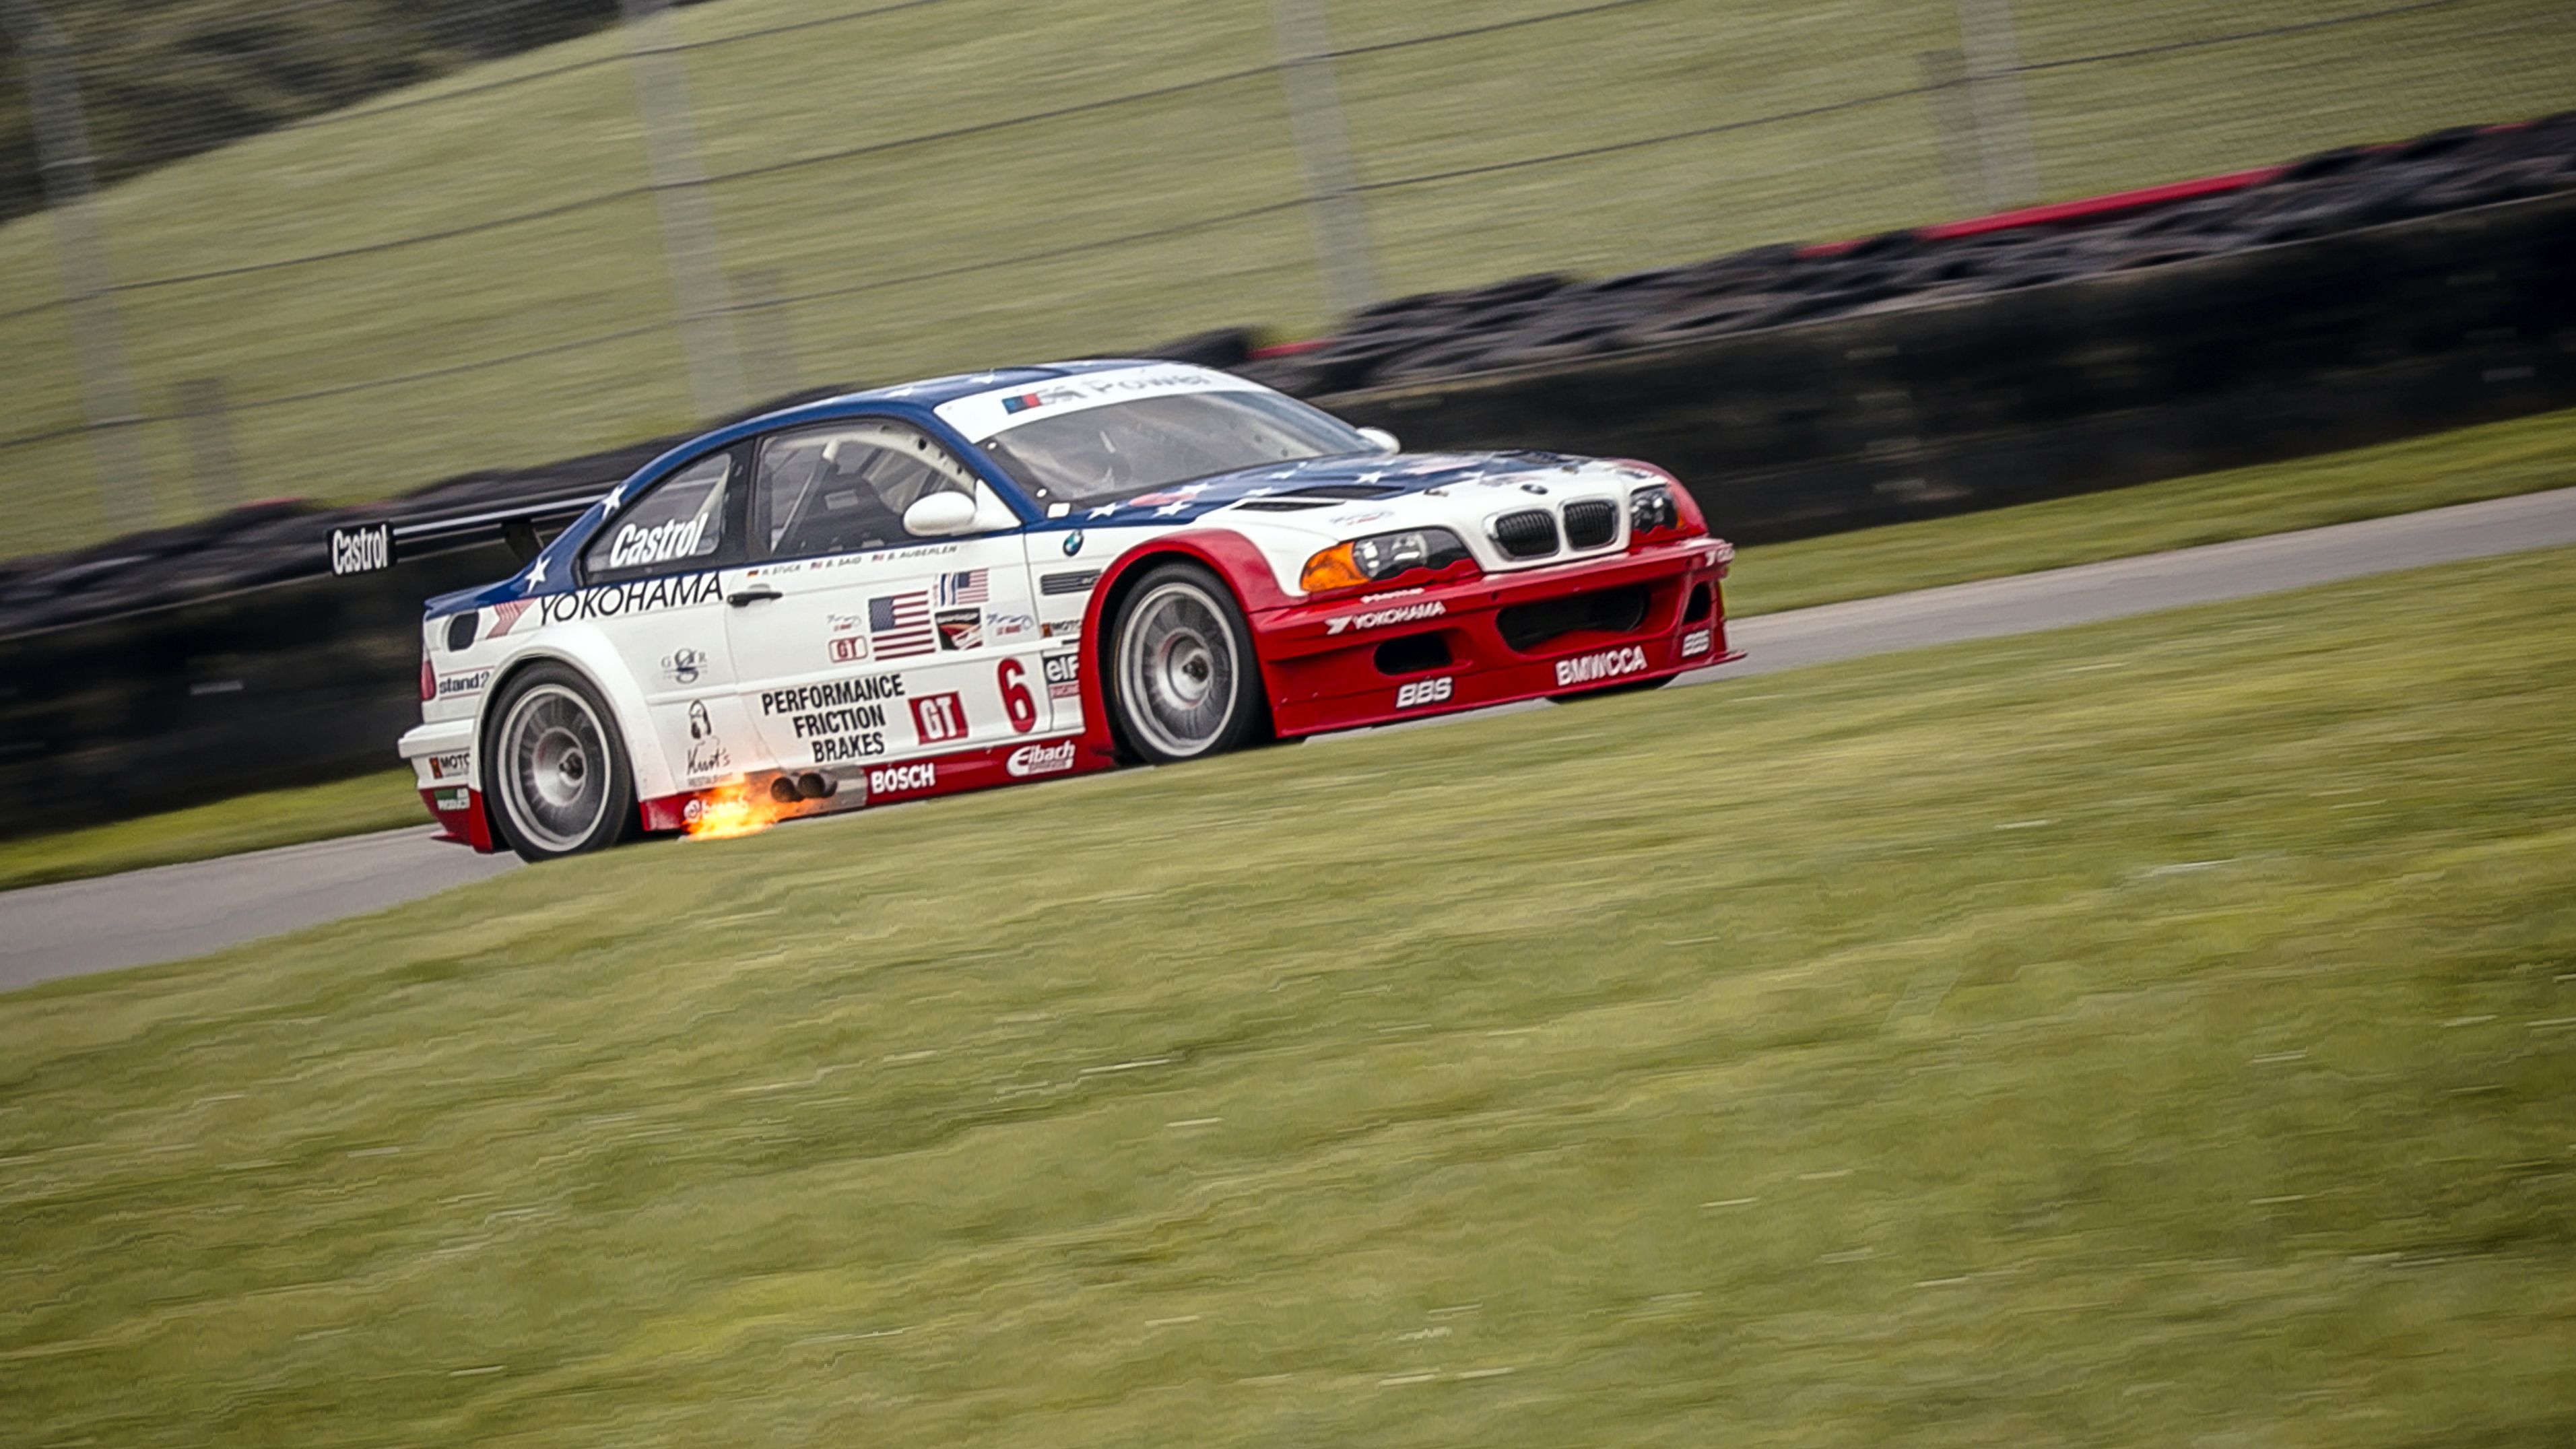 2001 M3 GTR racing on track with grass around it